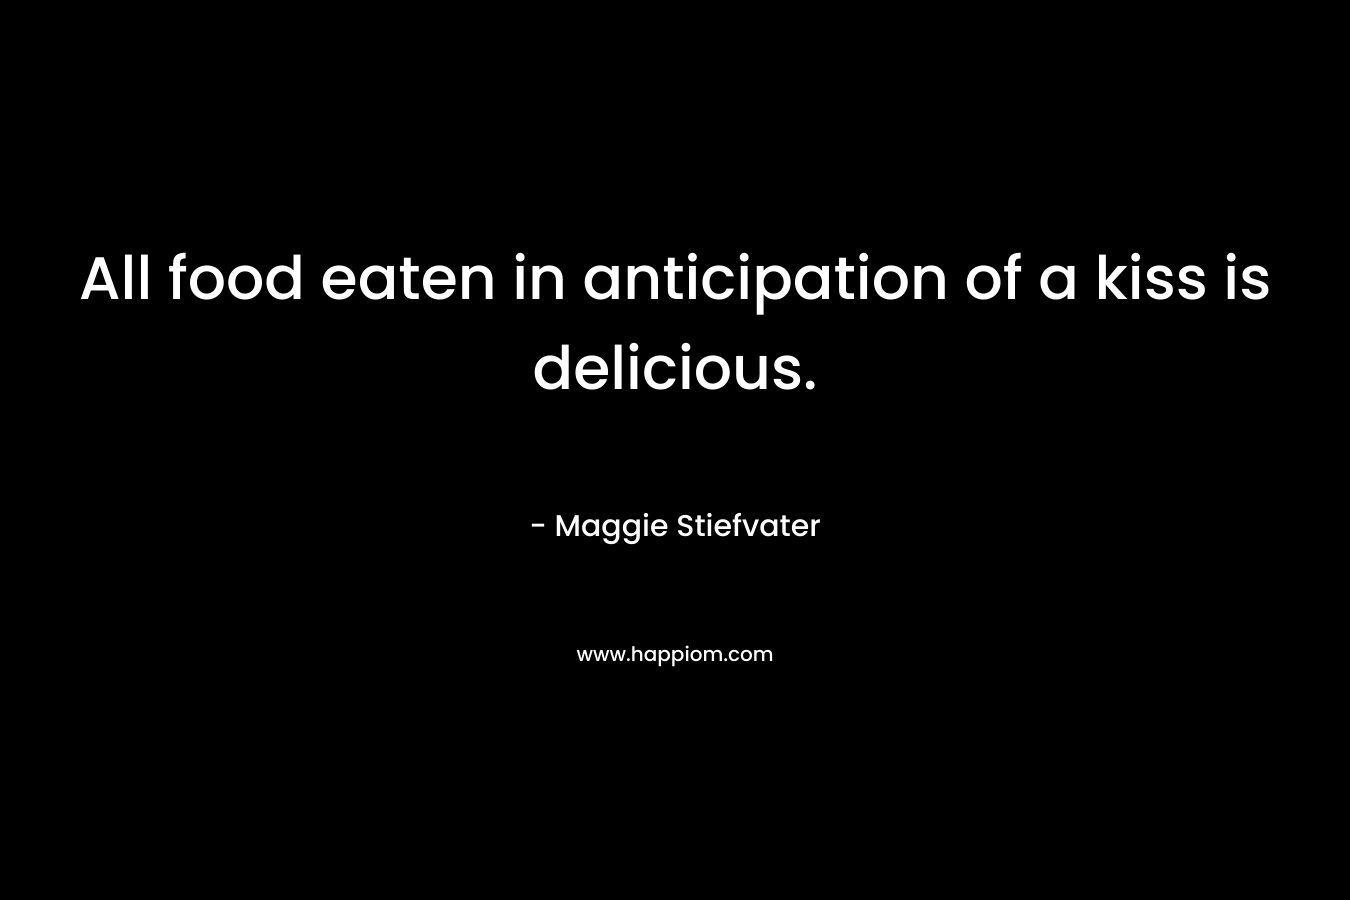 All food eaten in anticipation of a kiss is delicious. – Maggie Stiefvater